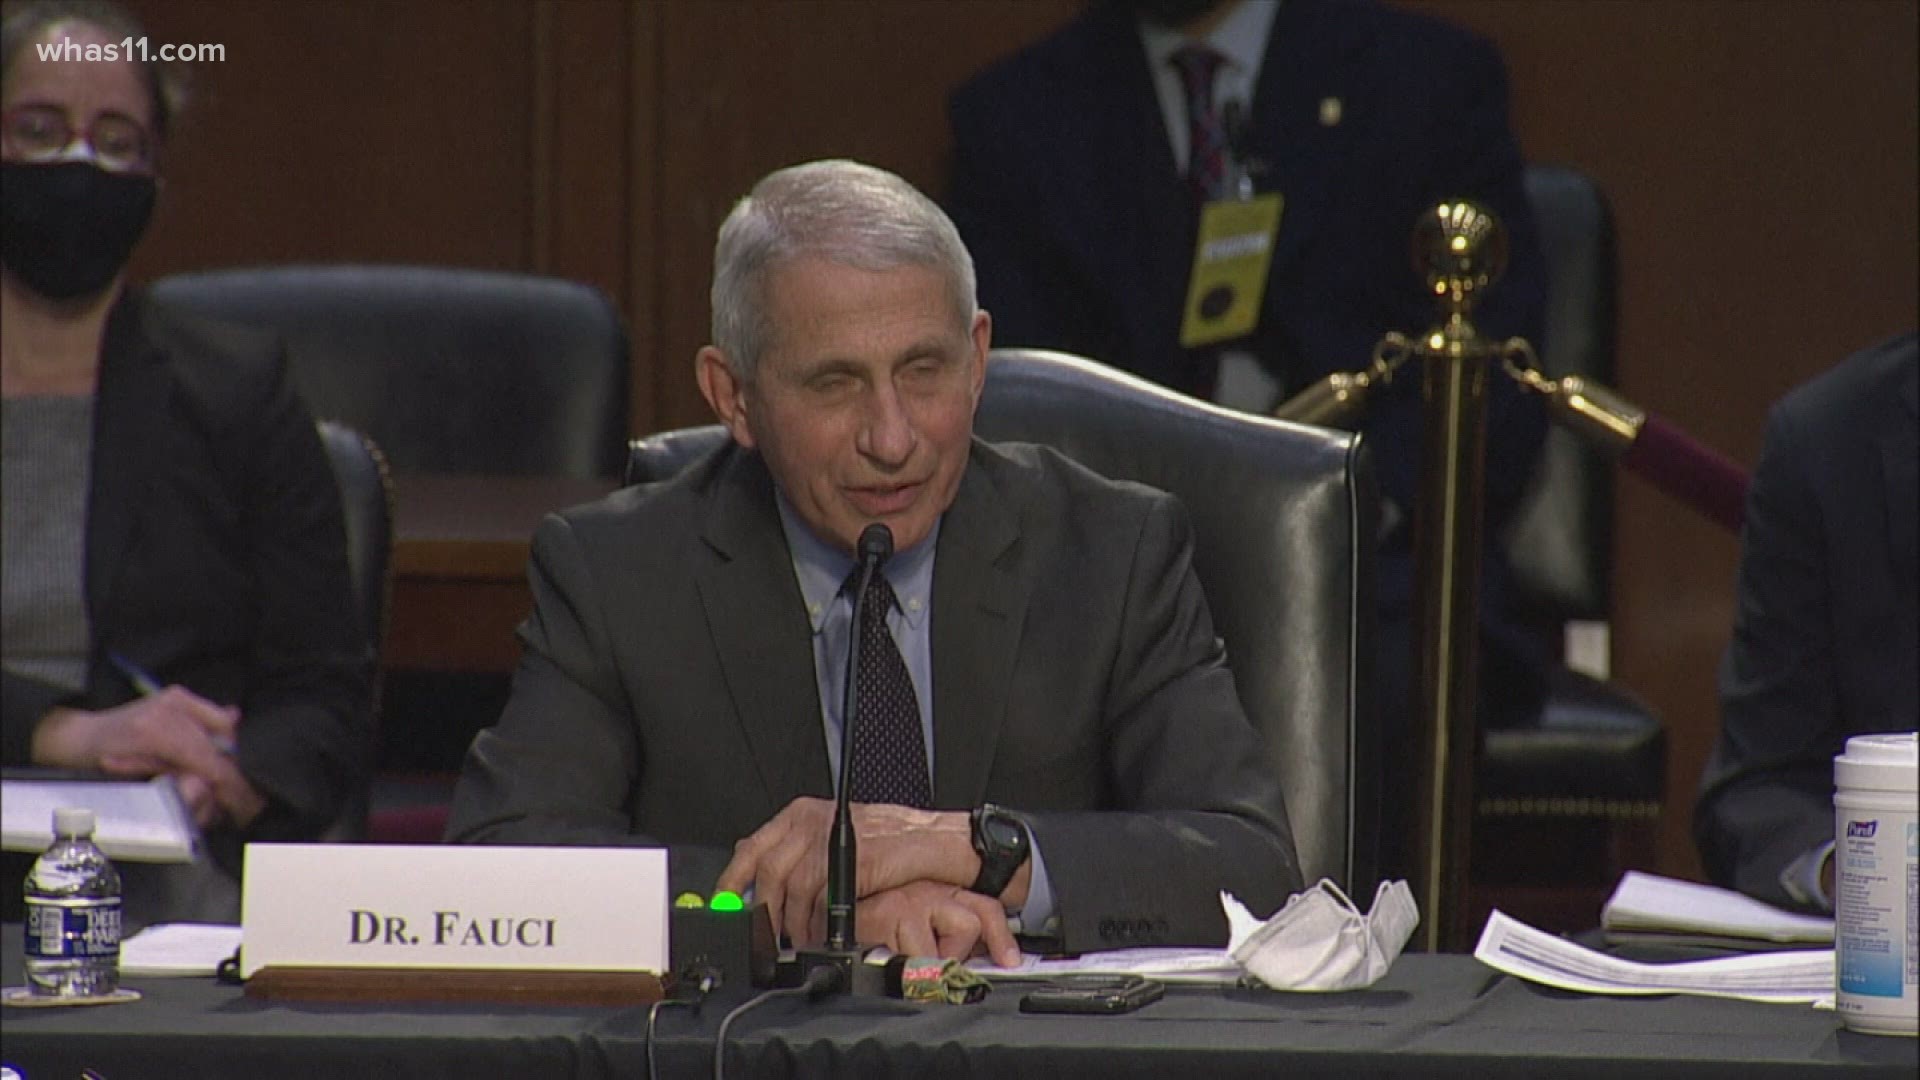 During a Senate hearing, Sen. Rand Paul said Dr. Fauci wearing two masks despite getting the vaccine was 'theater.' Dr. Fauci fired back.